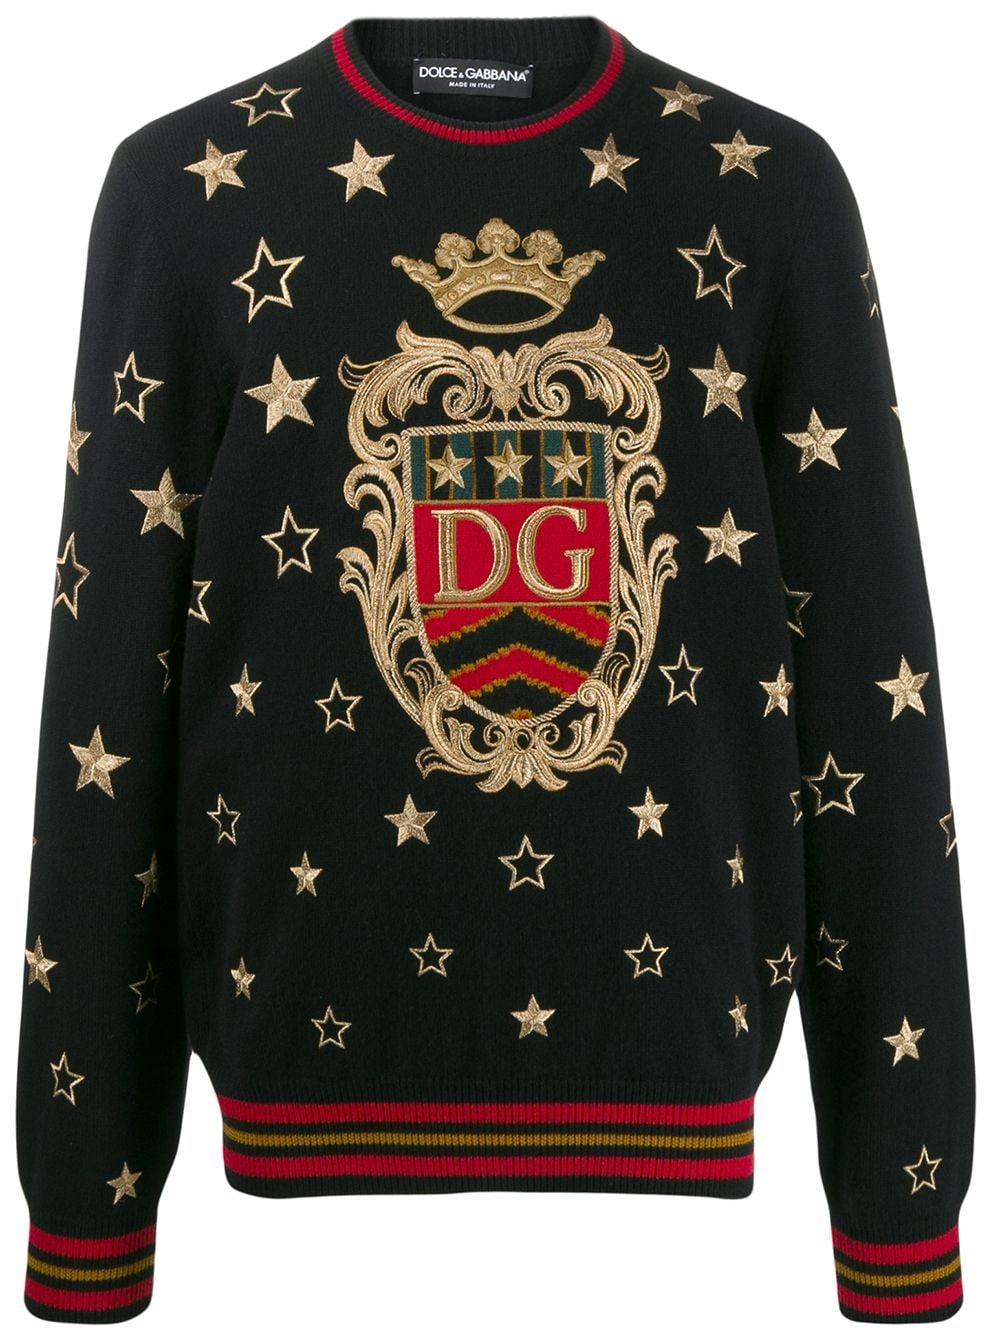 Dolce & Gabbana Wool Dg Star Embroidered Jumper in for - Lyst